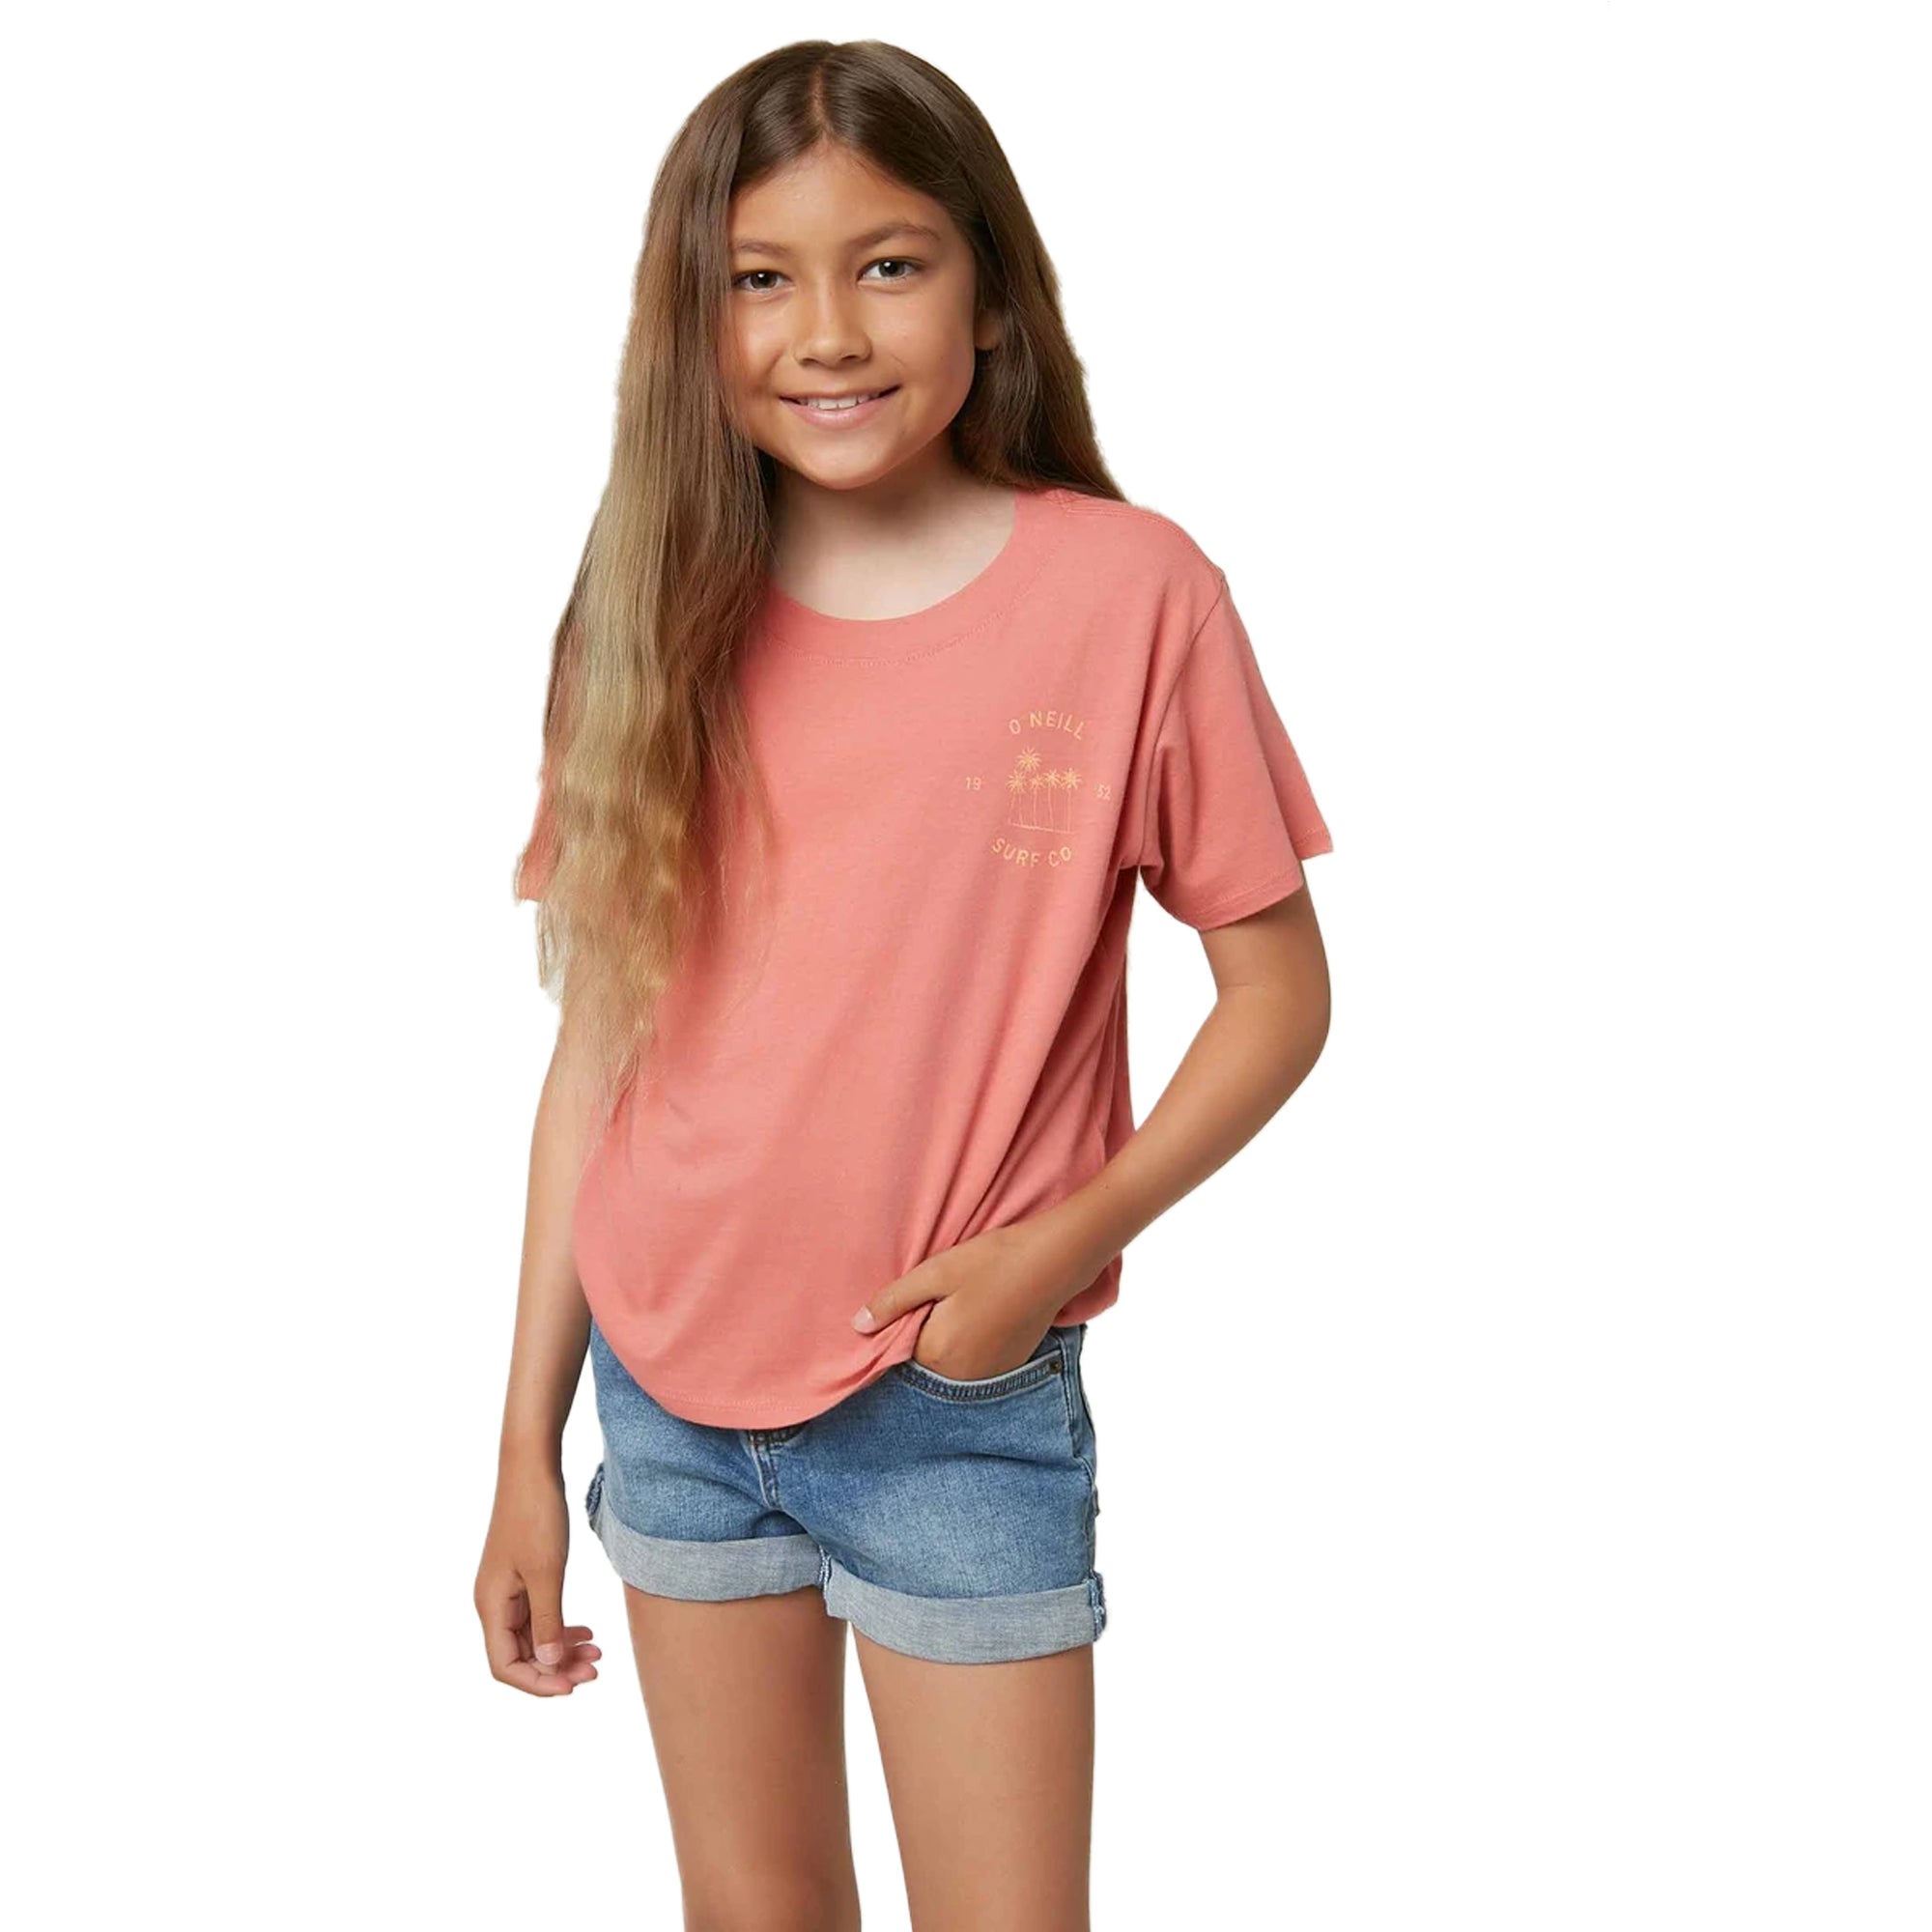 O'Neill Throwback Youth Girl's S/S T-Shirt